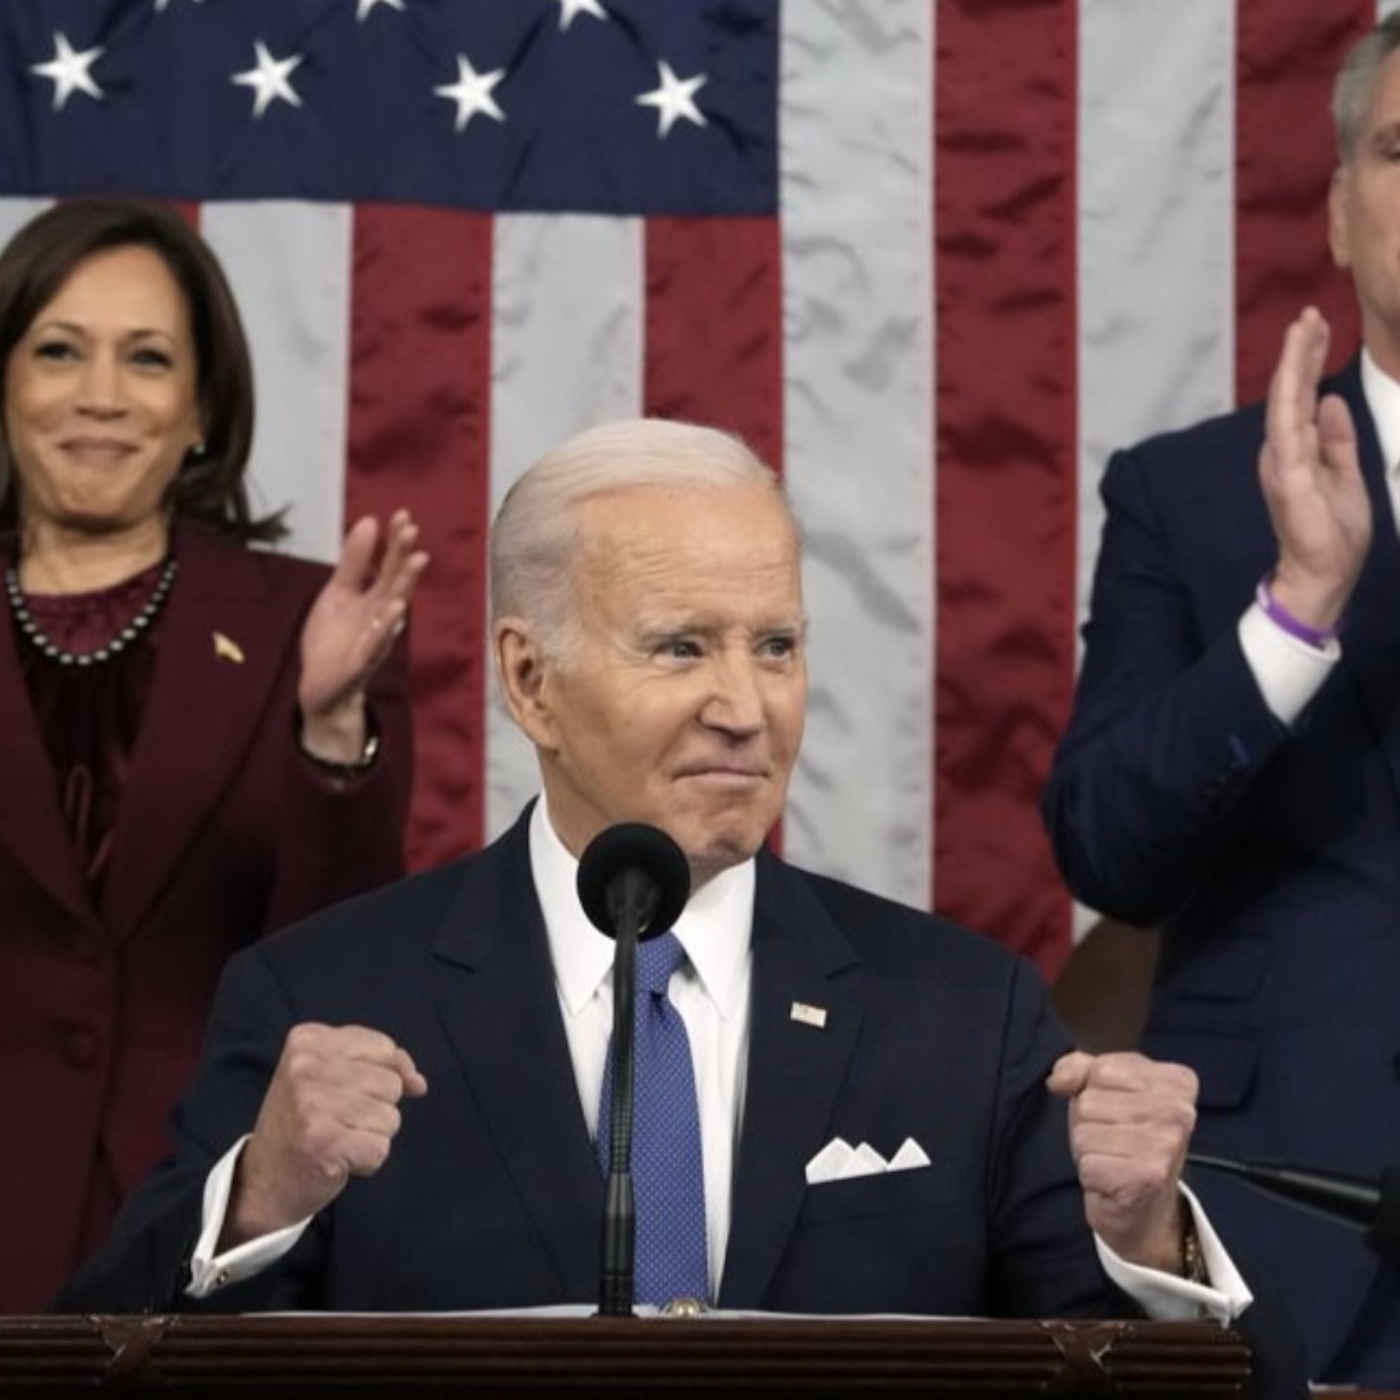 Biden and the crazies in the GOP-Harold Meyerson, Chris Lehmann; ”The Warmth of Other Suns”-Isabel Wilkerson